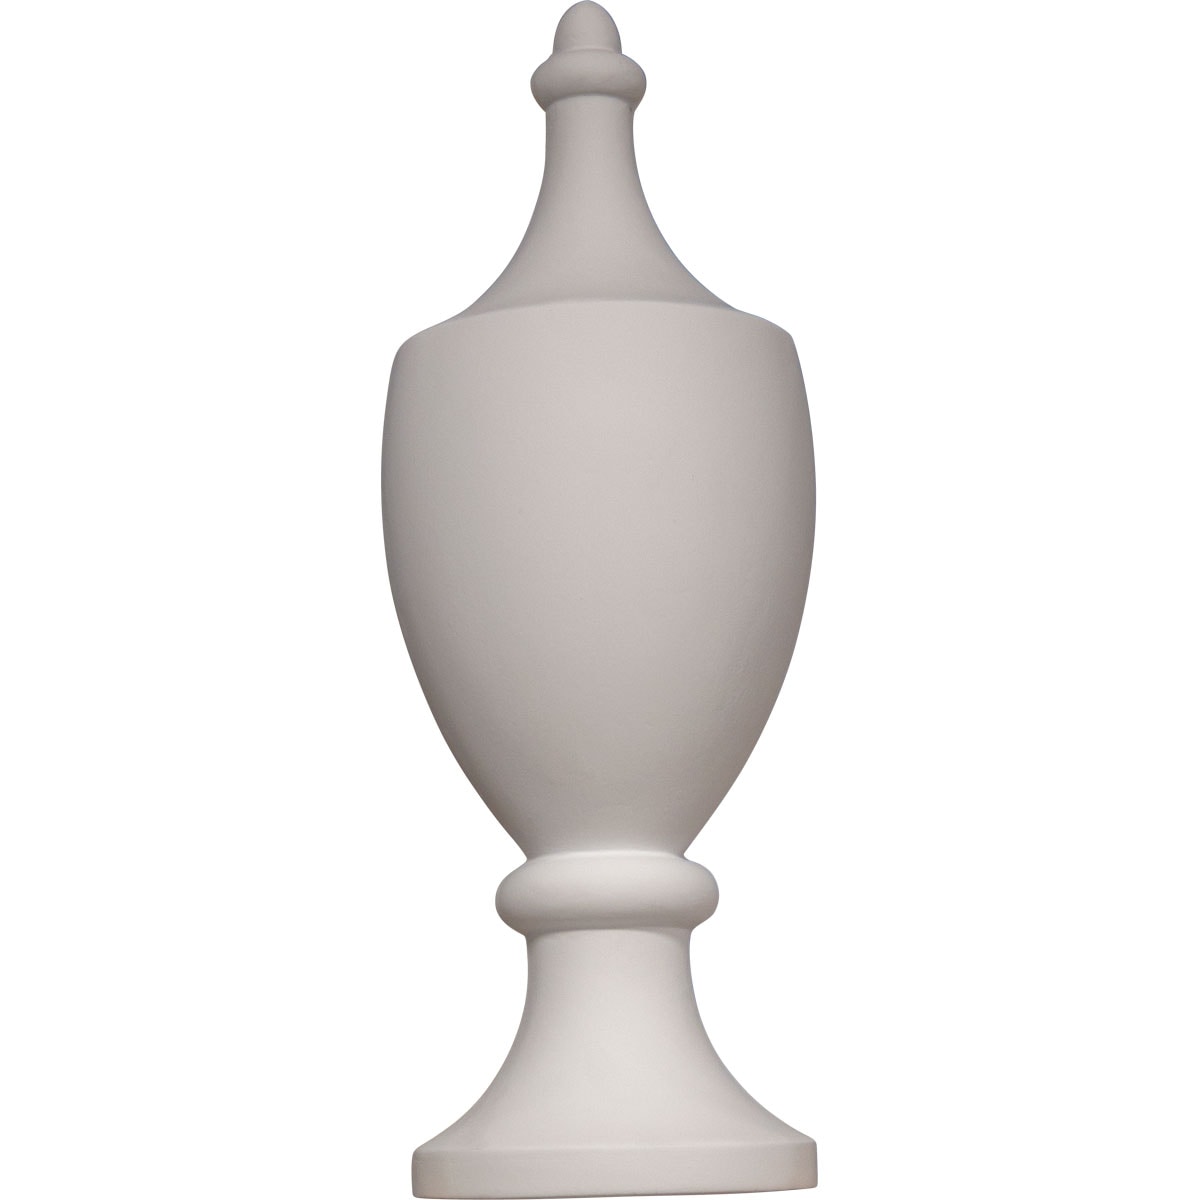 Highland Manor Wood Products Large Kline Ball Maple Wood Finial - 7 Tall x  4 7/8 Wide - Unfinished Round Wooden Finial for Indoor Use - Perfect for